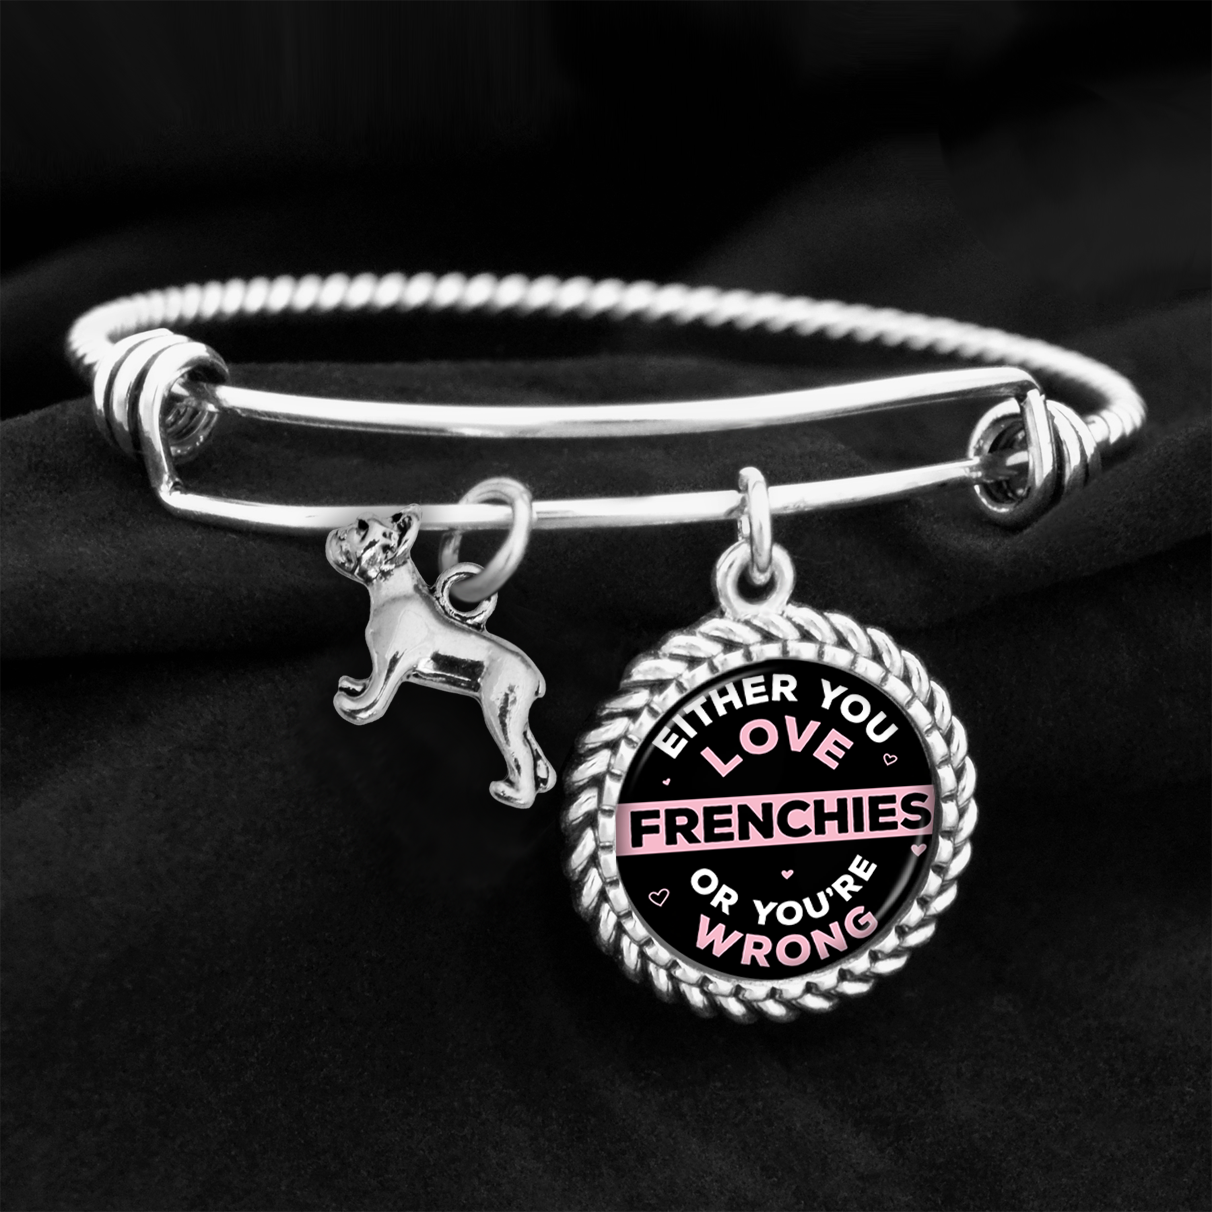 Either You Love French Bulldogs Or You're Wrong Charm Bracelet